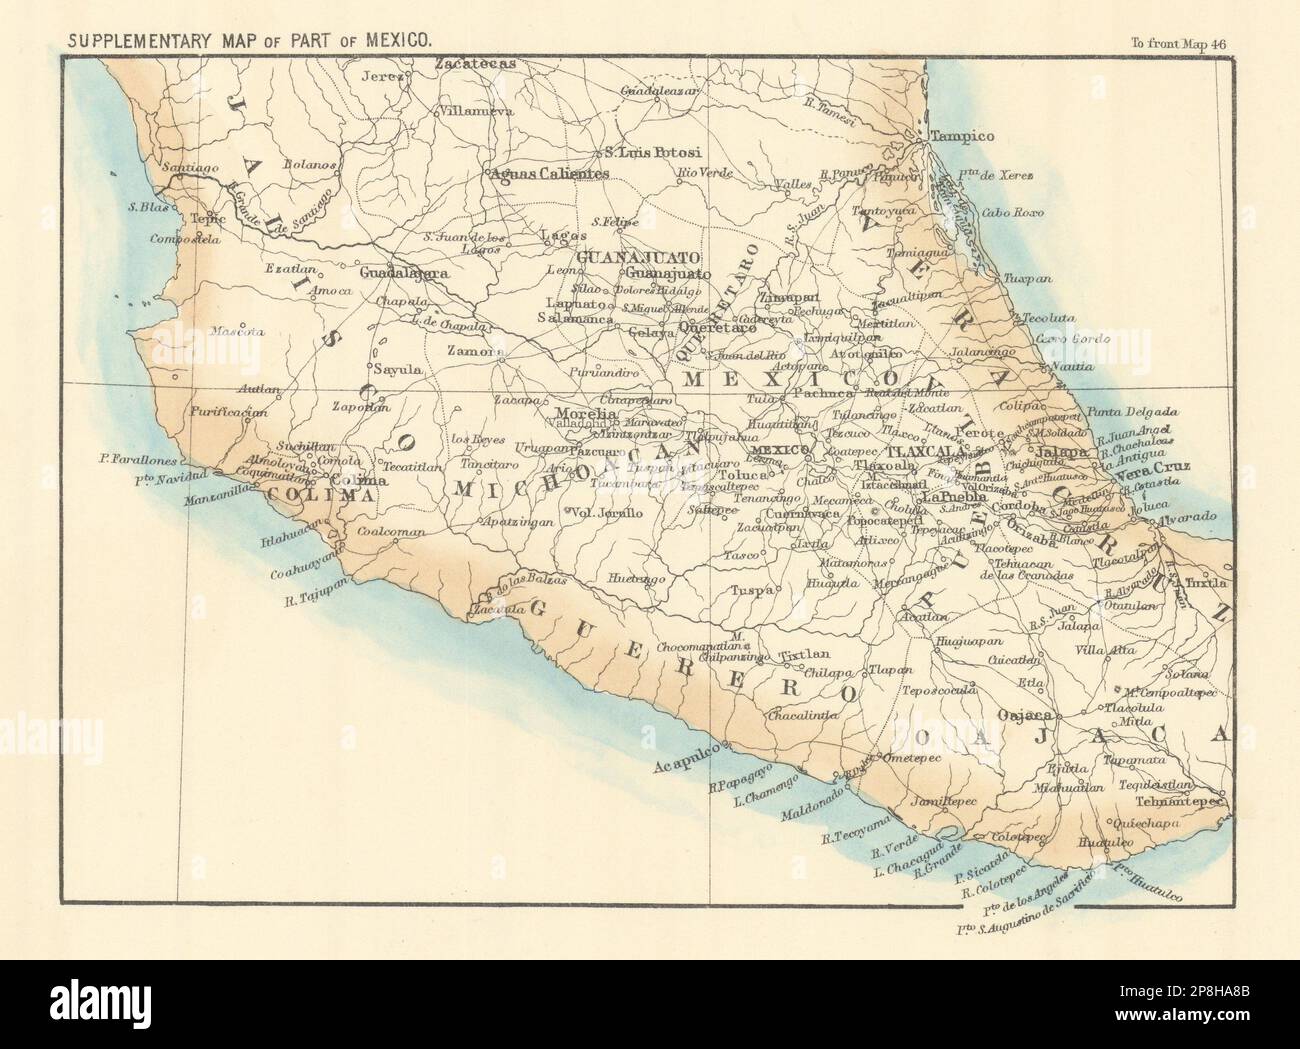 Supplementary Map of part of Mexico. Central Mexico 1862 old antique chart Stock Photo